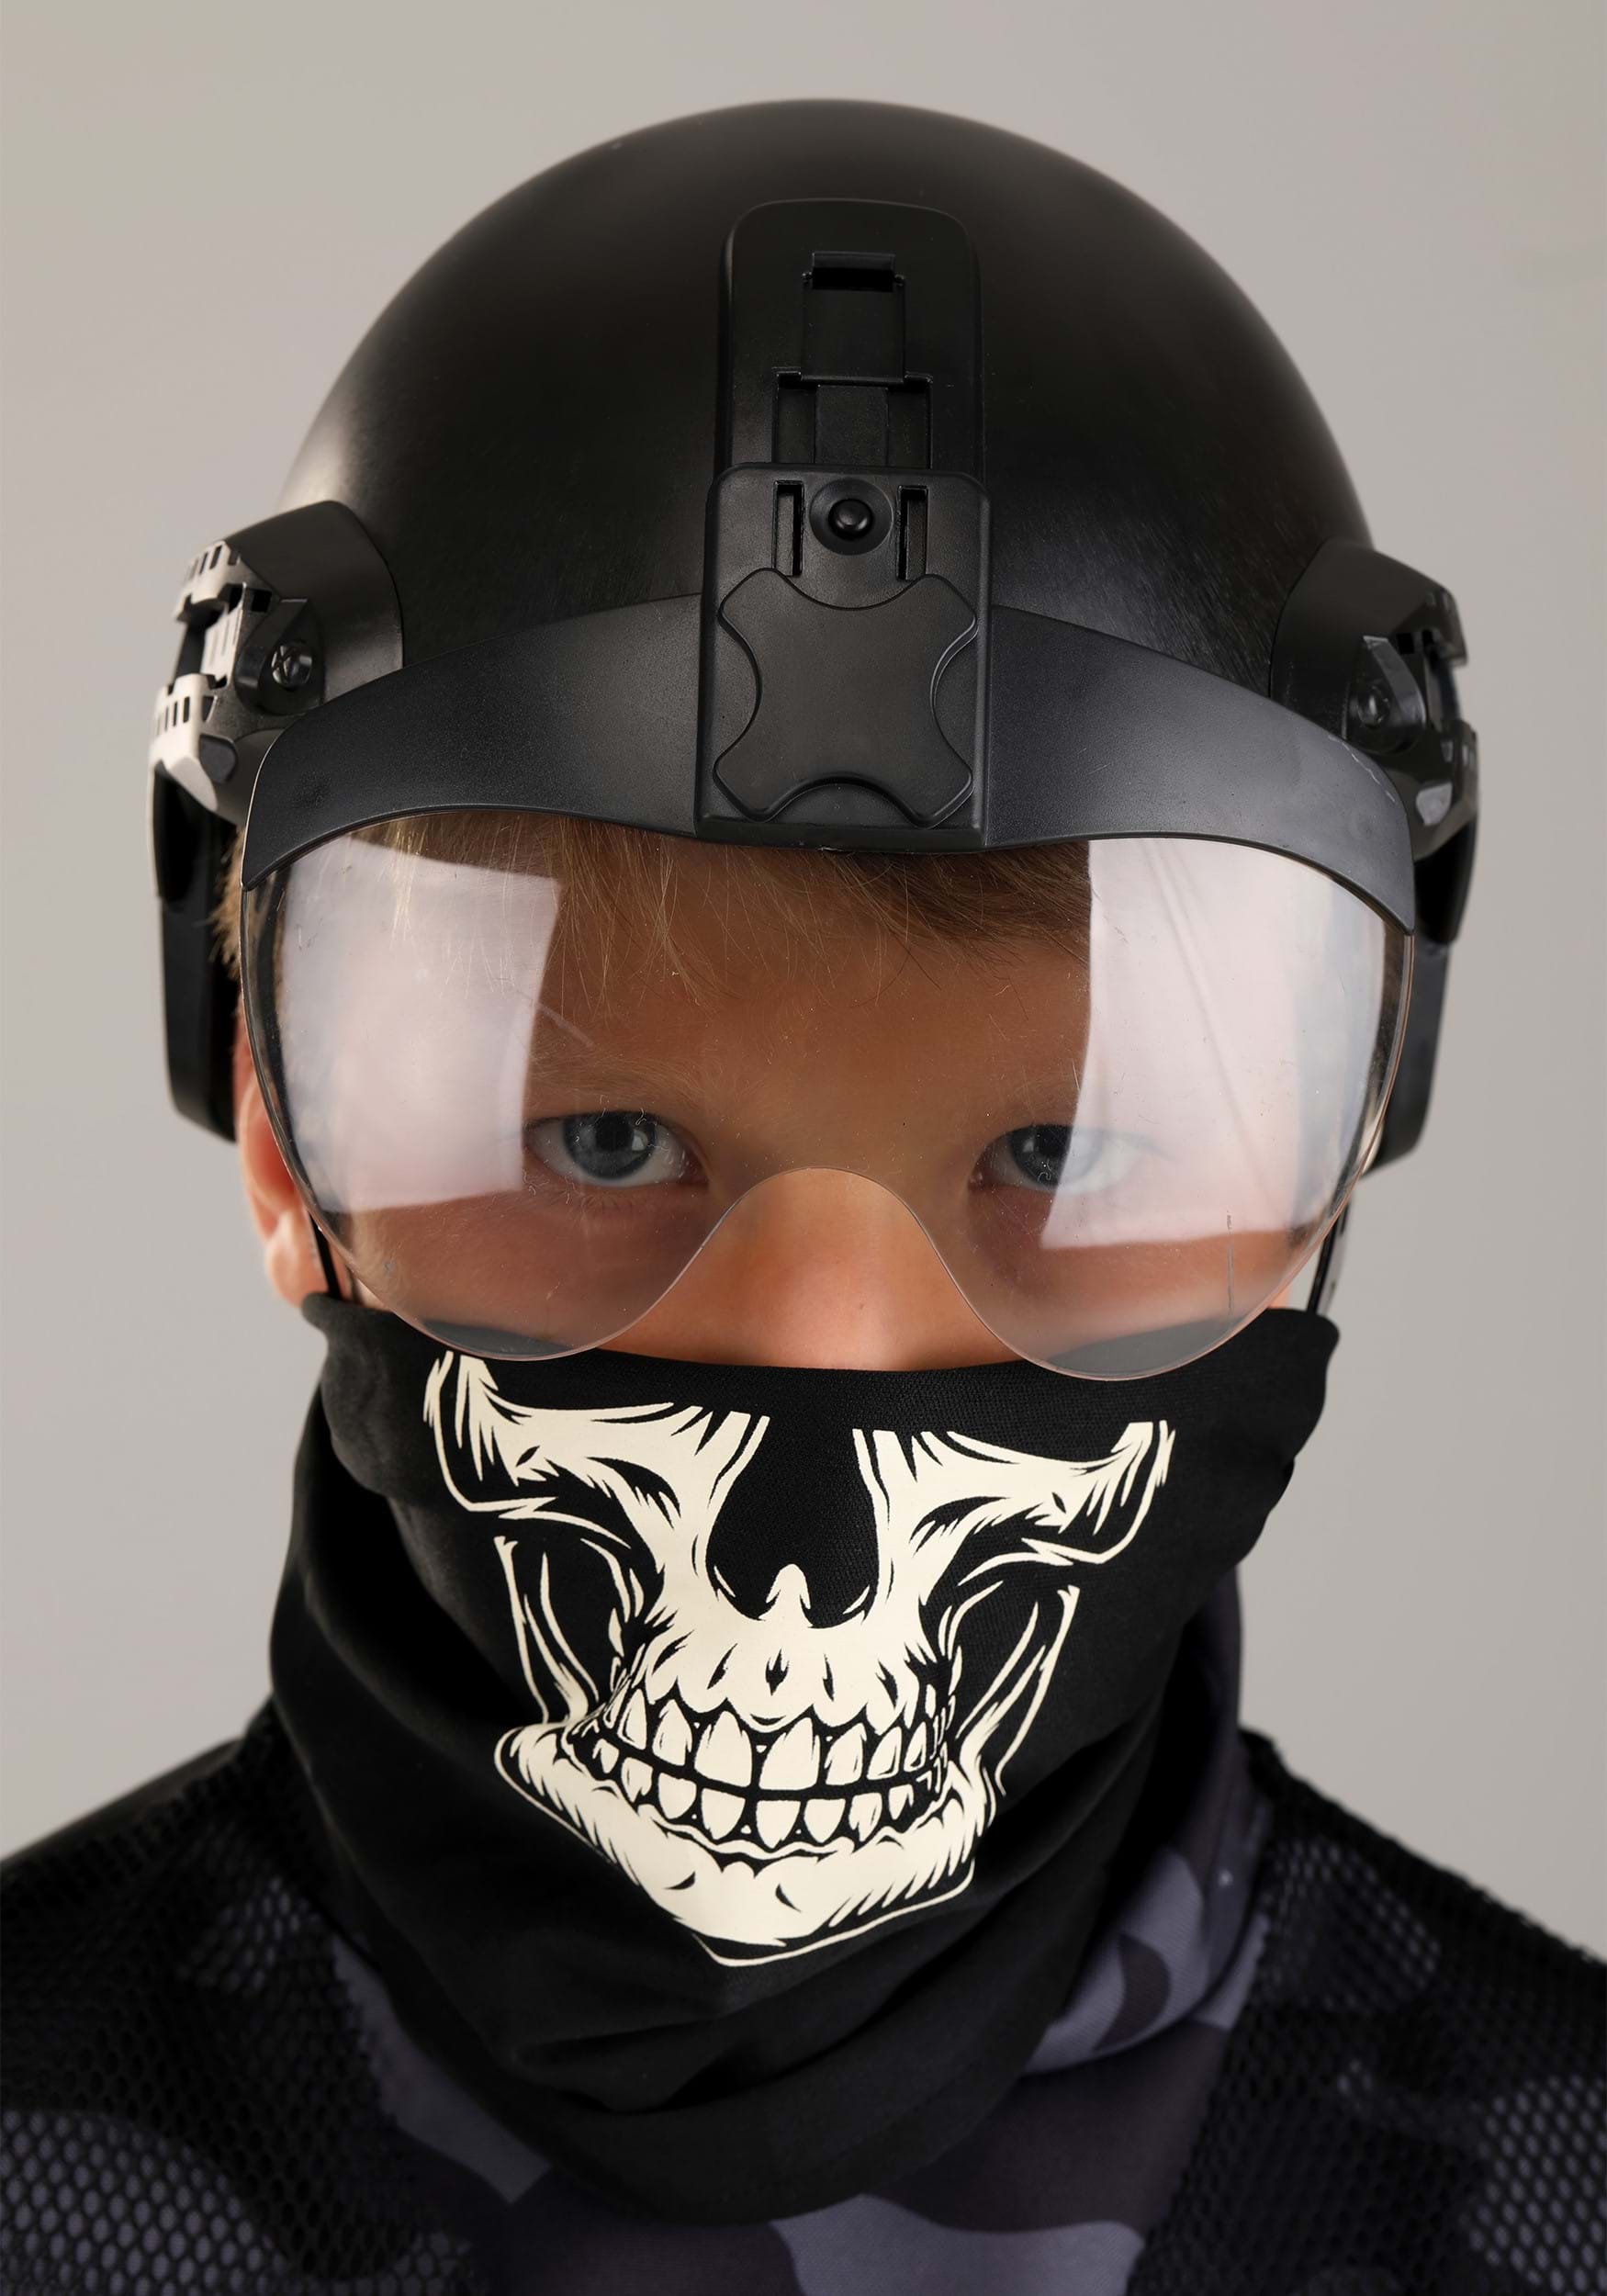 Midnight Navy Seal Costume For Kid's